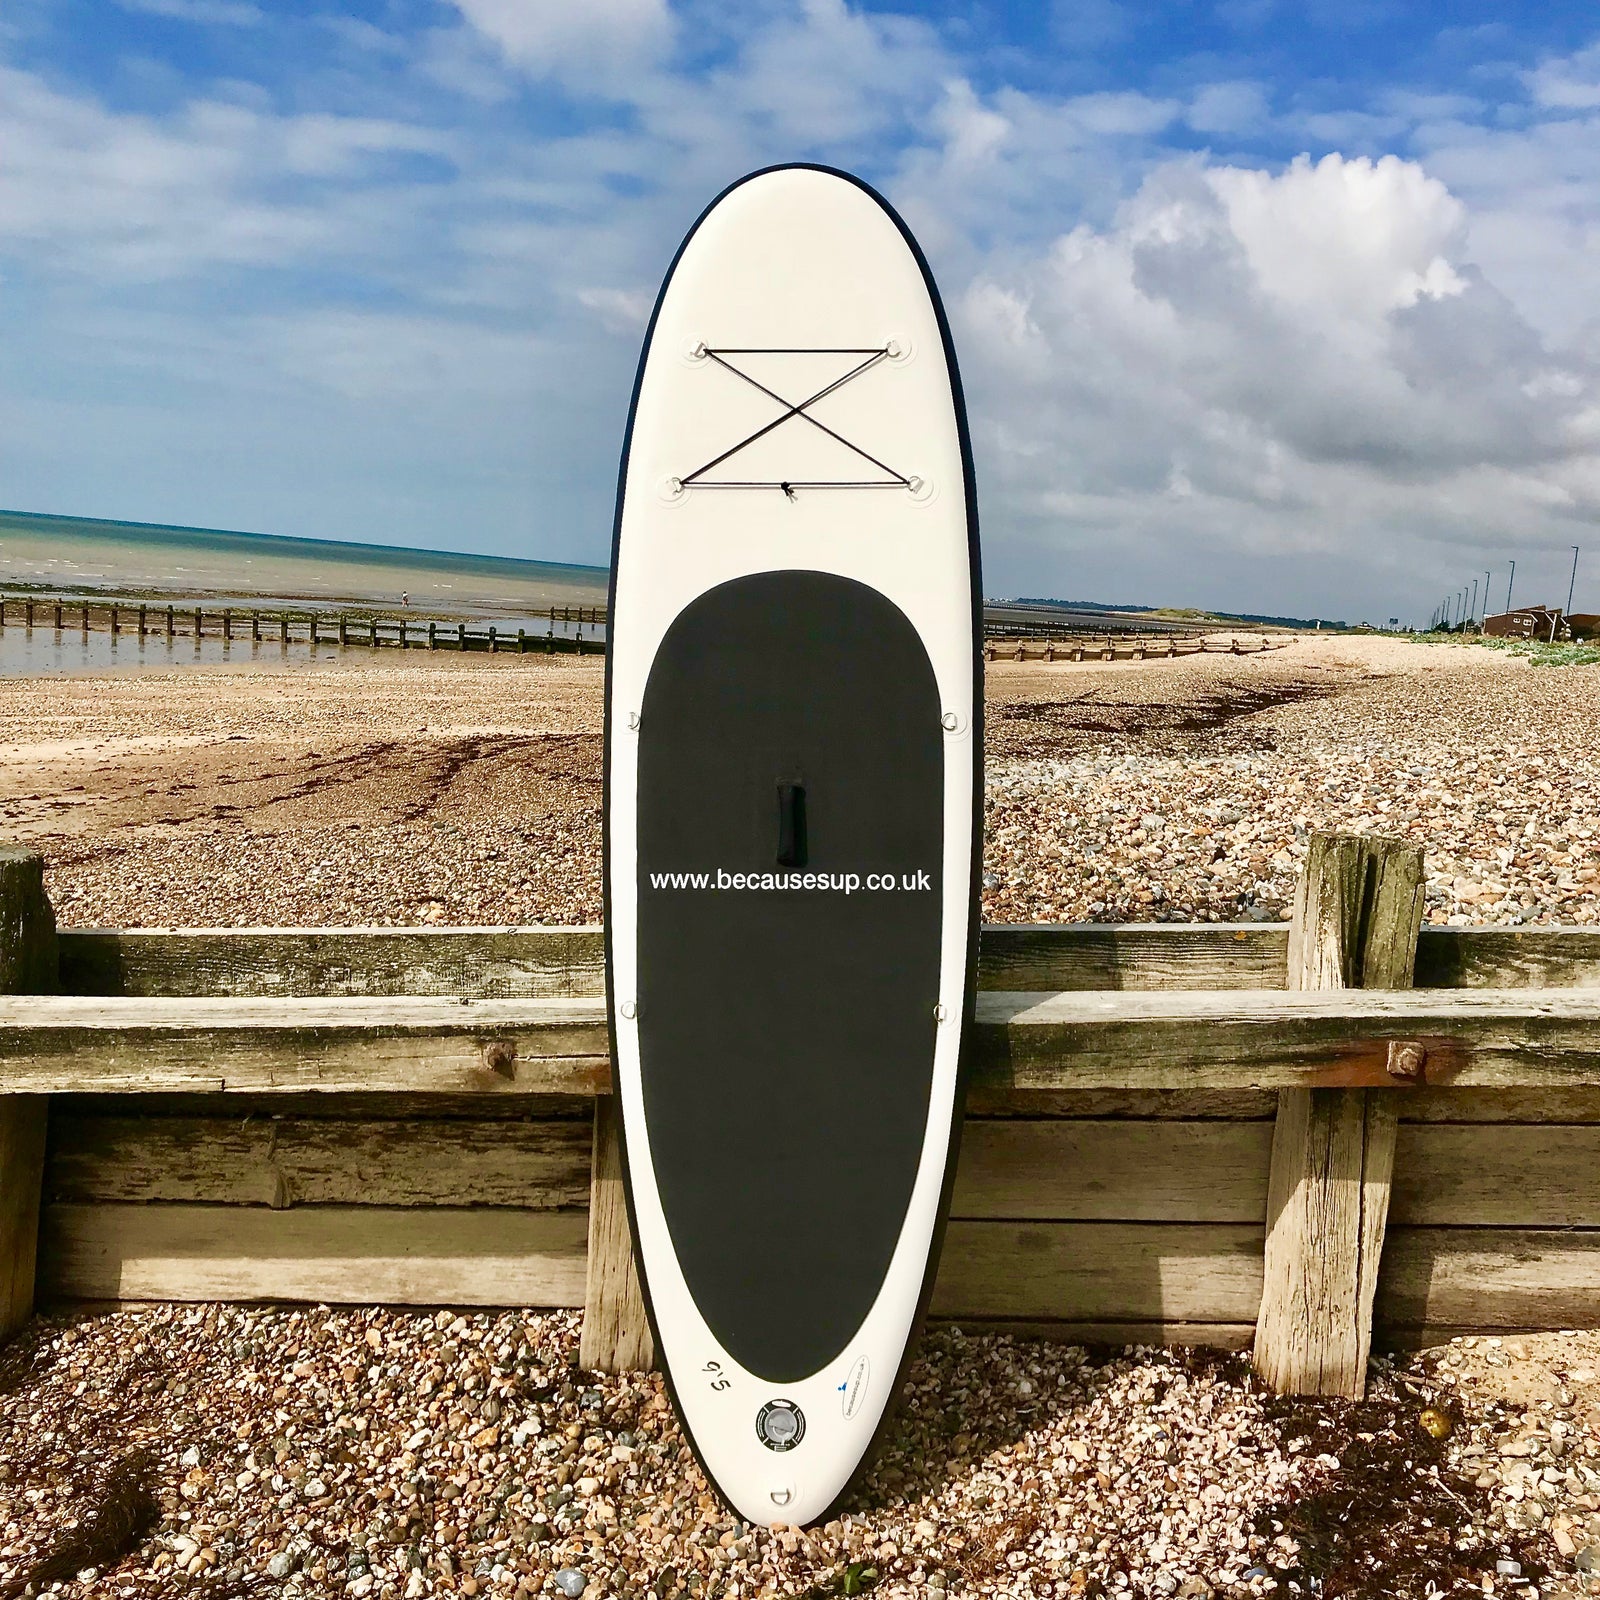 New 2019 PRE-LAUNCH OFFERS Inflatable stand up paddle boards